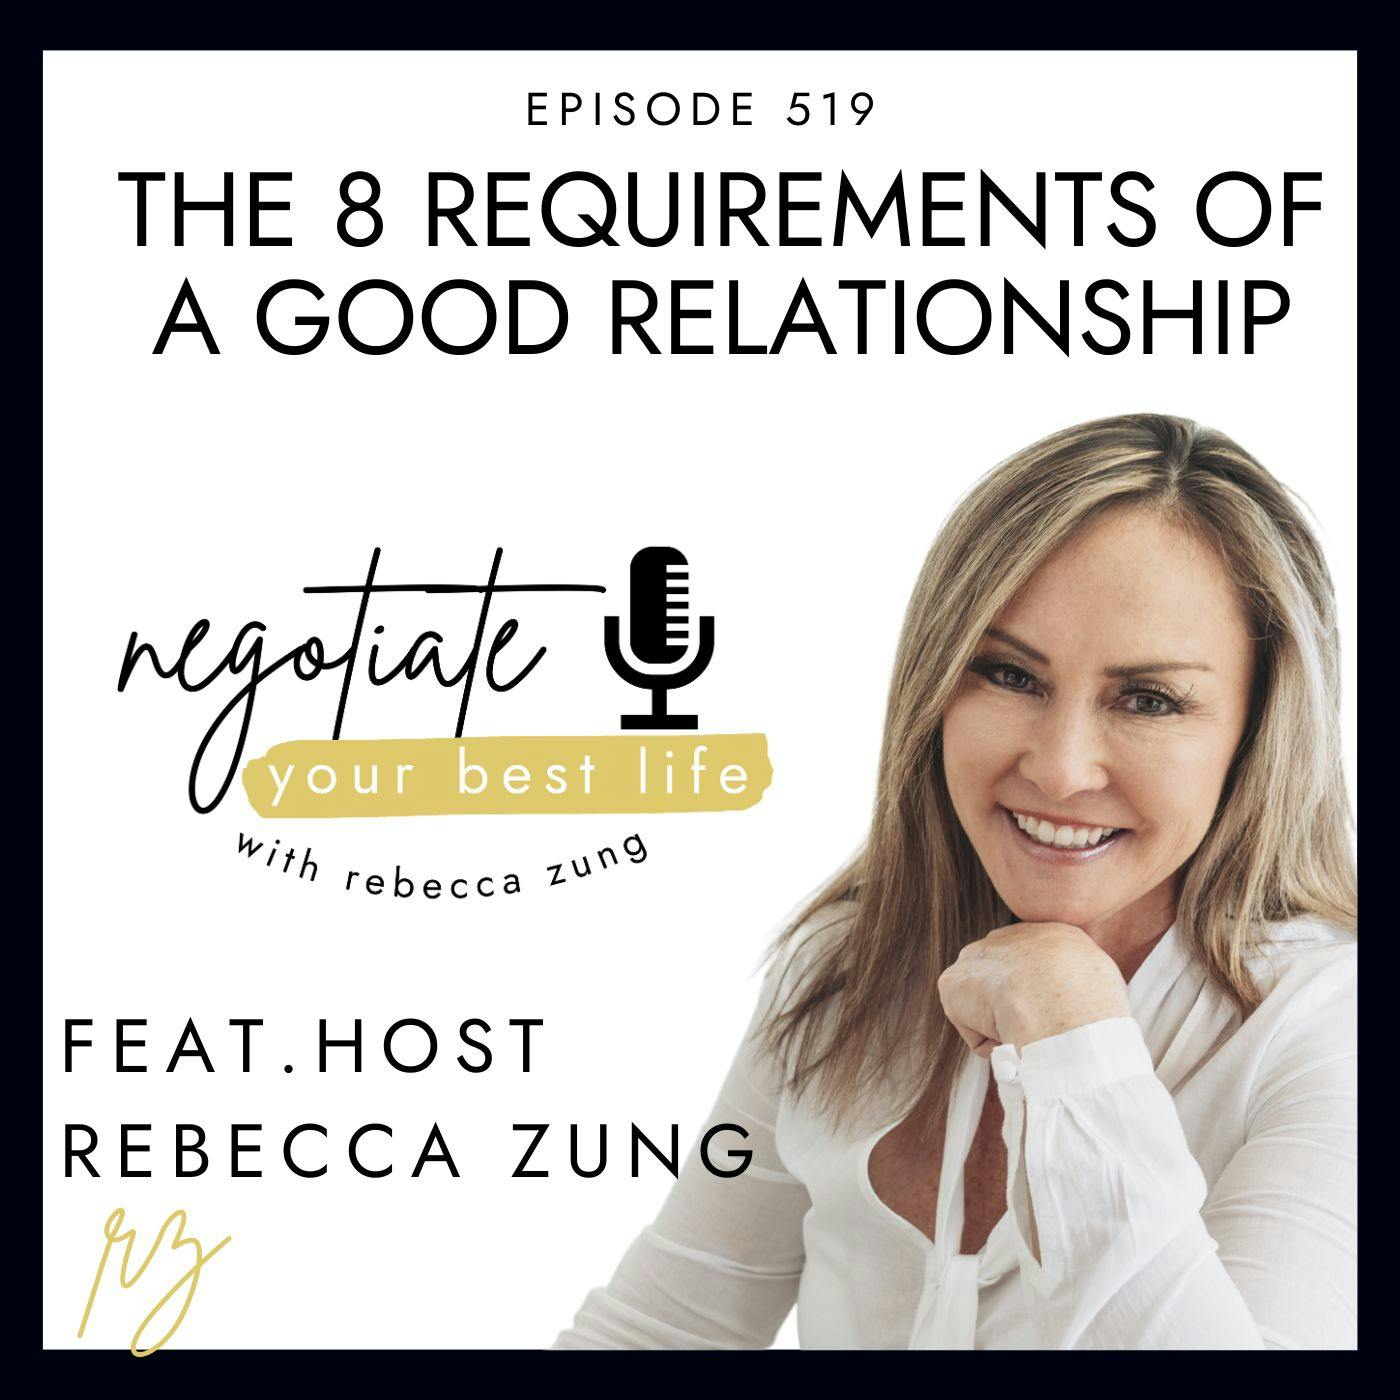 The 8 Requirements of a Good Relationship with Rebecca Zung on Negotiate Your Best Life #519